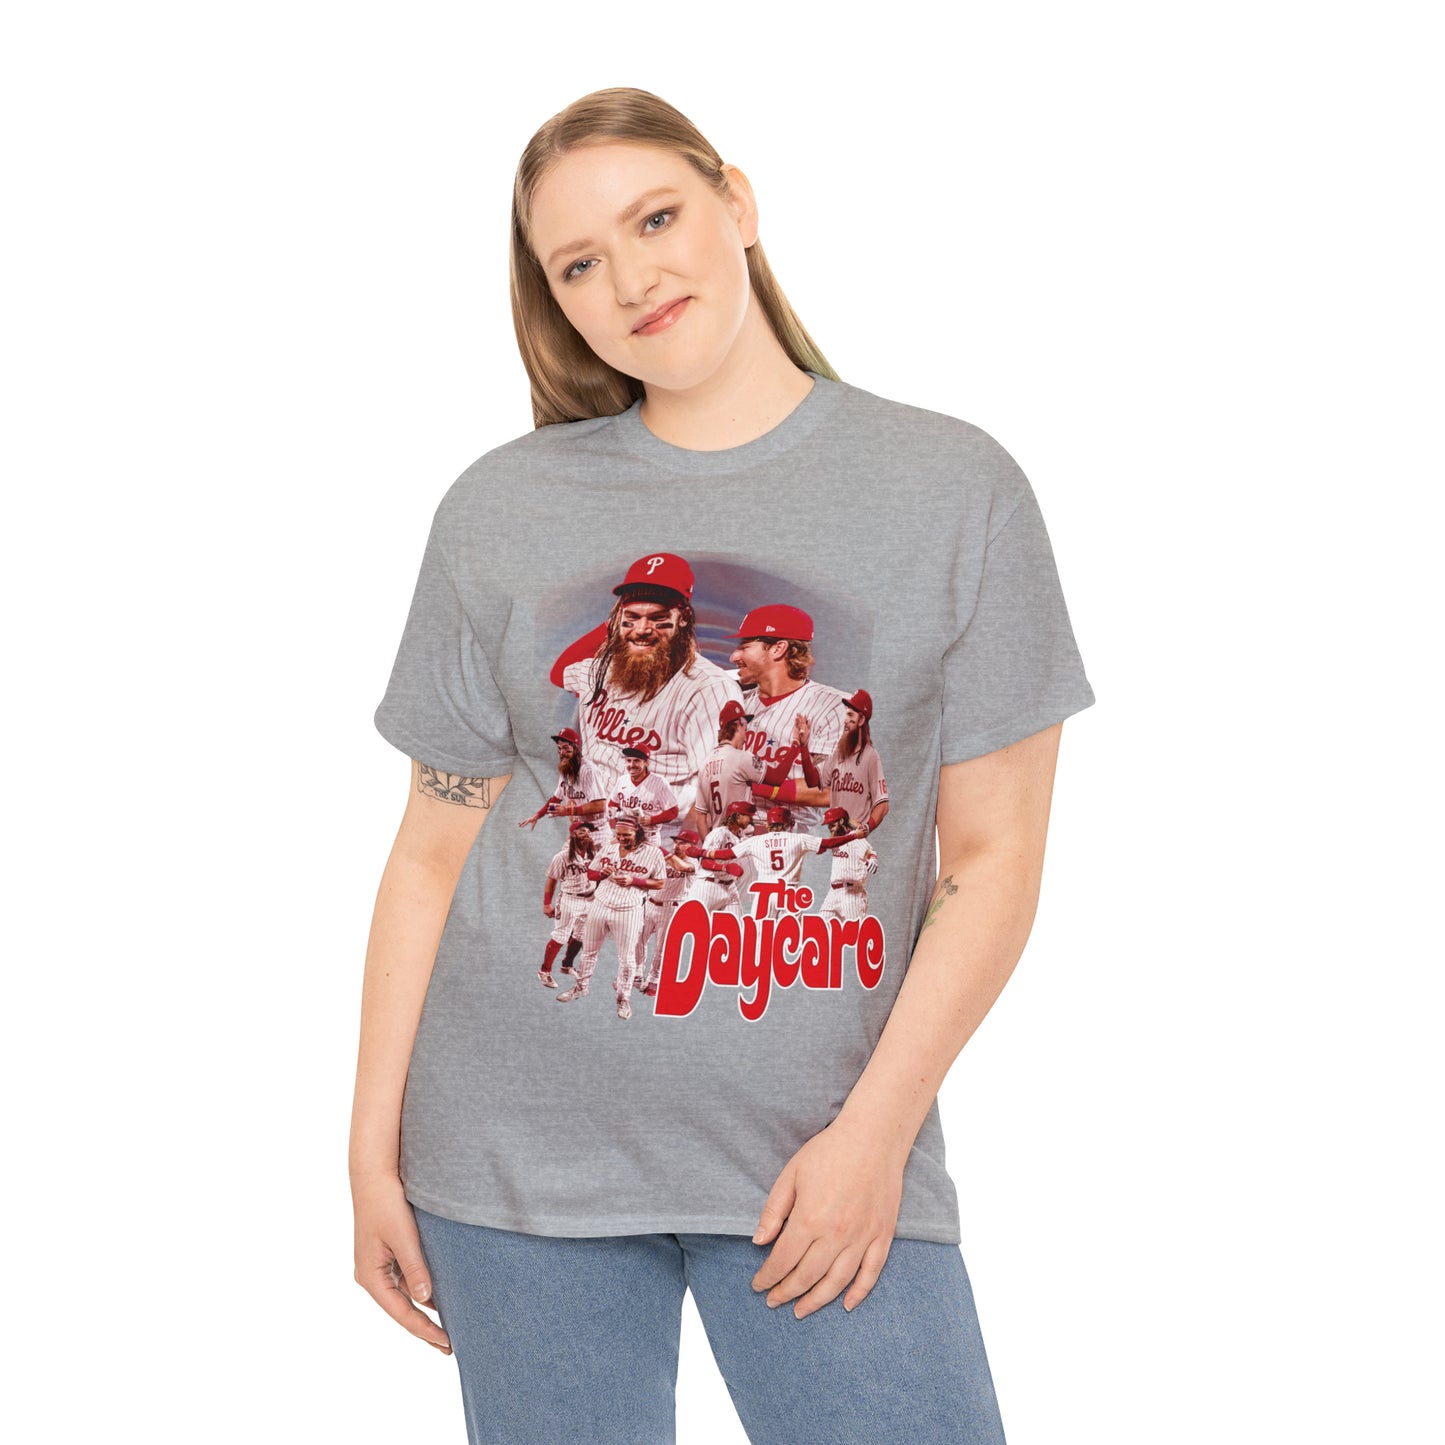 The Daycare Phillies Tee